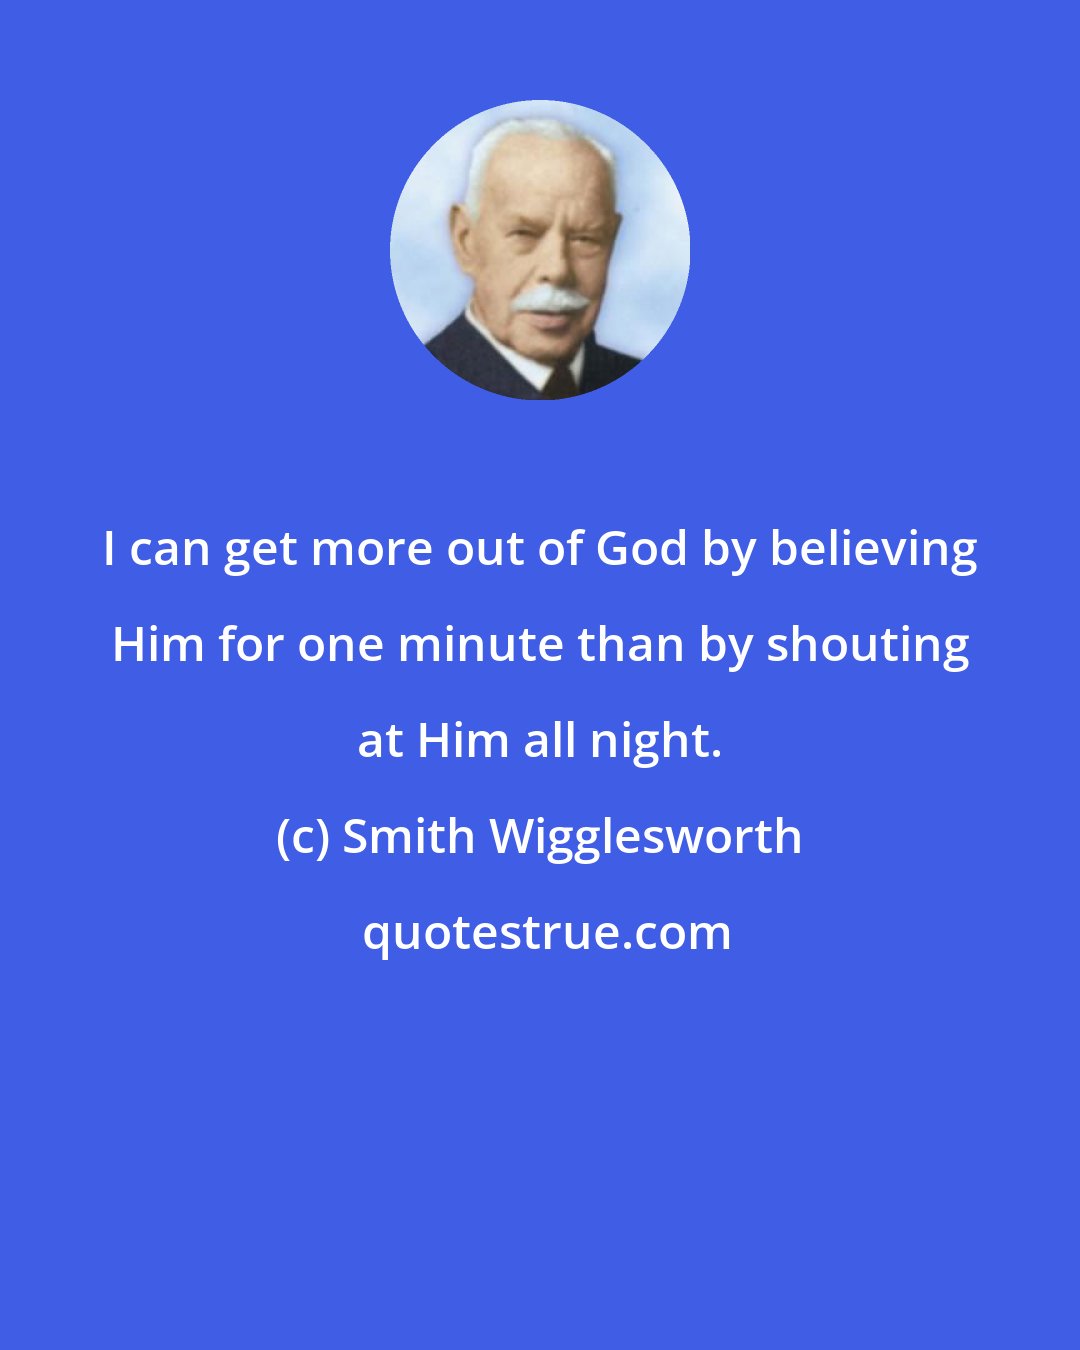 Smith Wigglesworth: I can get more out of God by believing Him for one minute than by shouting at Him all night.